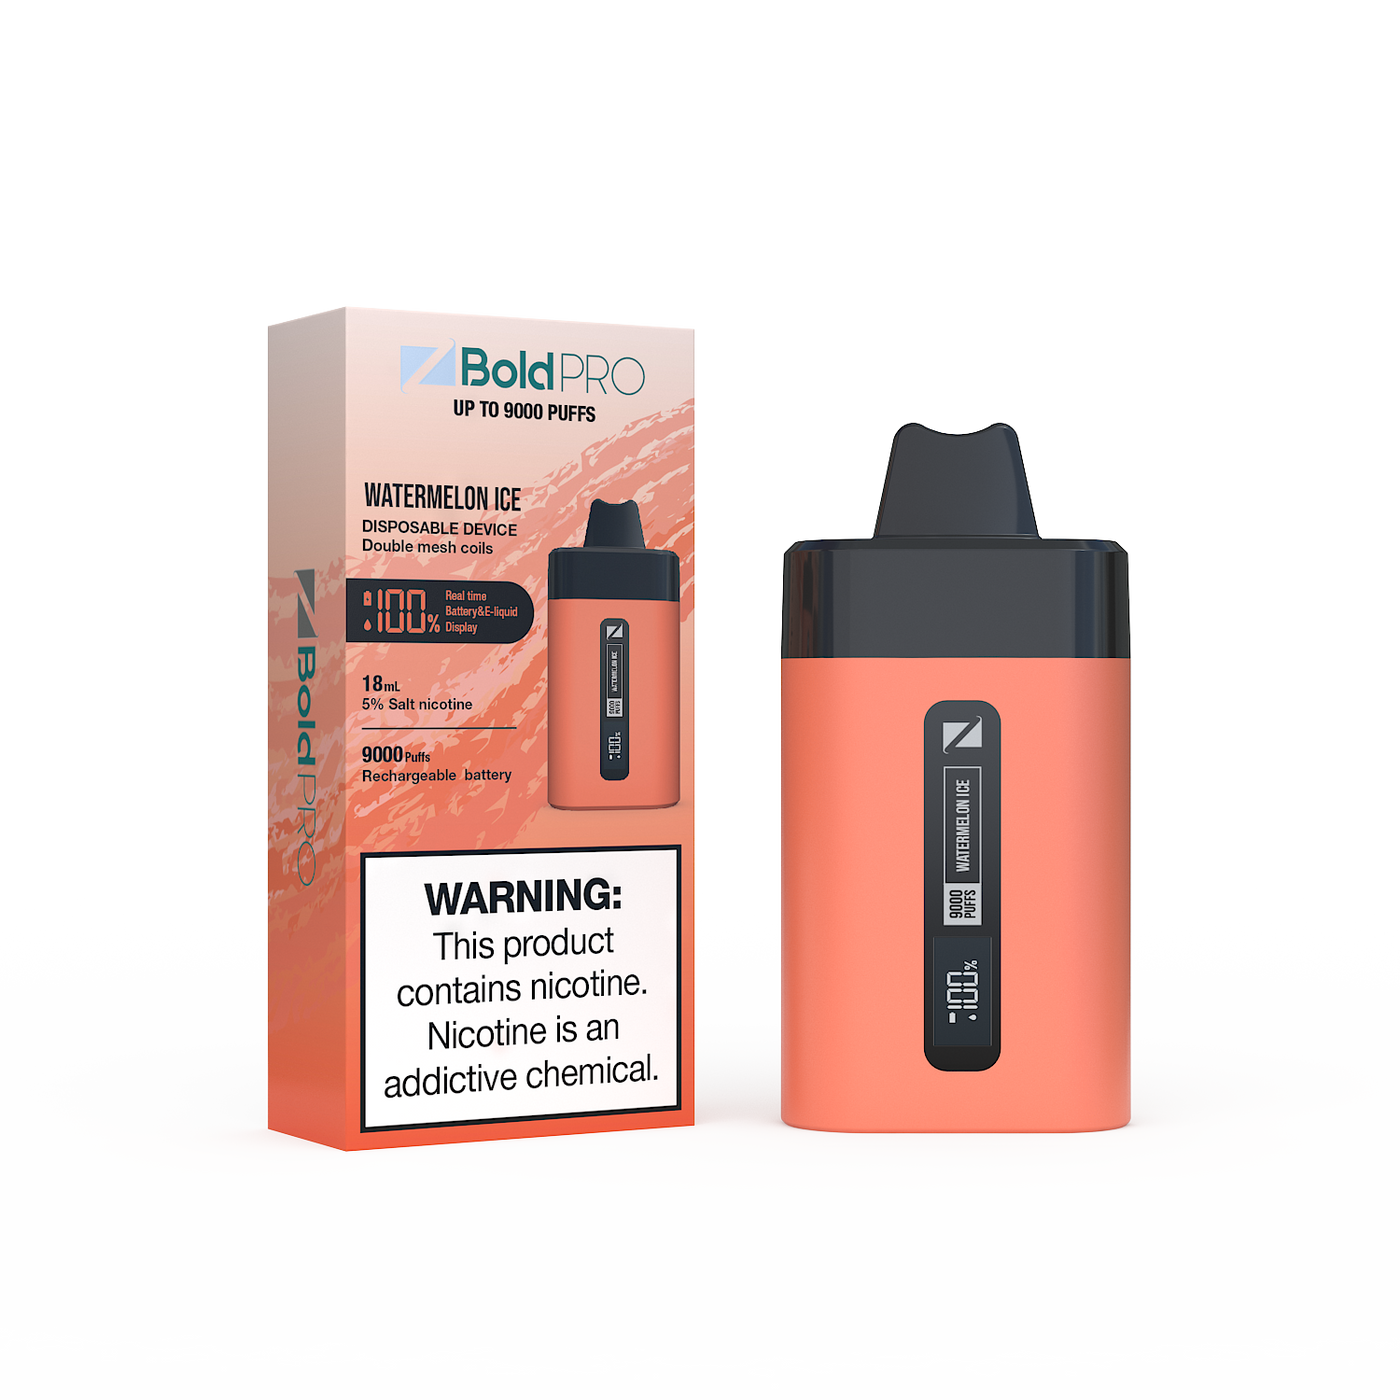 Z Bold Pro - Watermelon Ice - 9000 Puffs - LED Screen with Juice and Battery Indicator